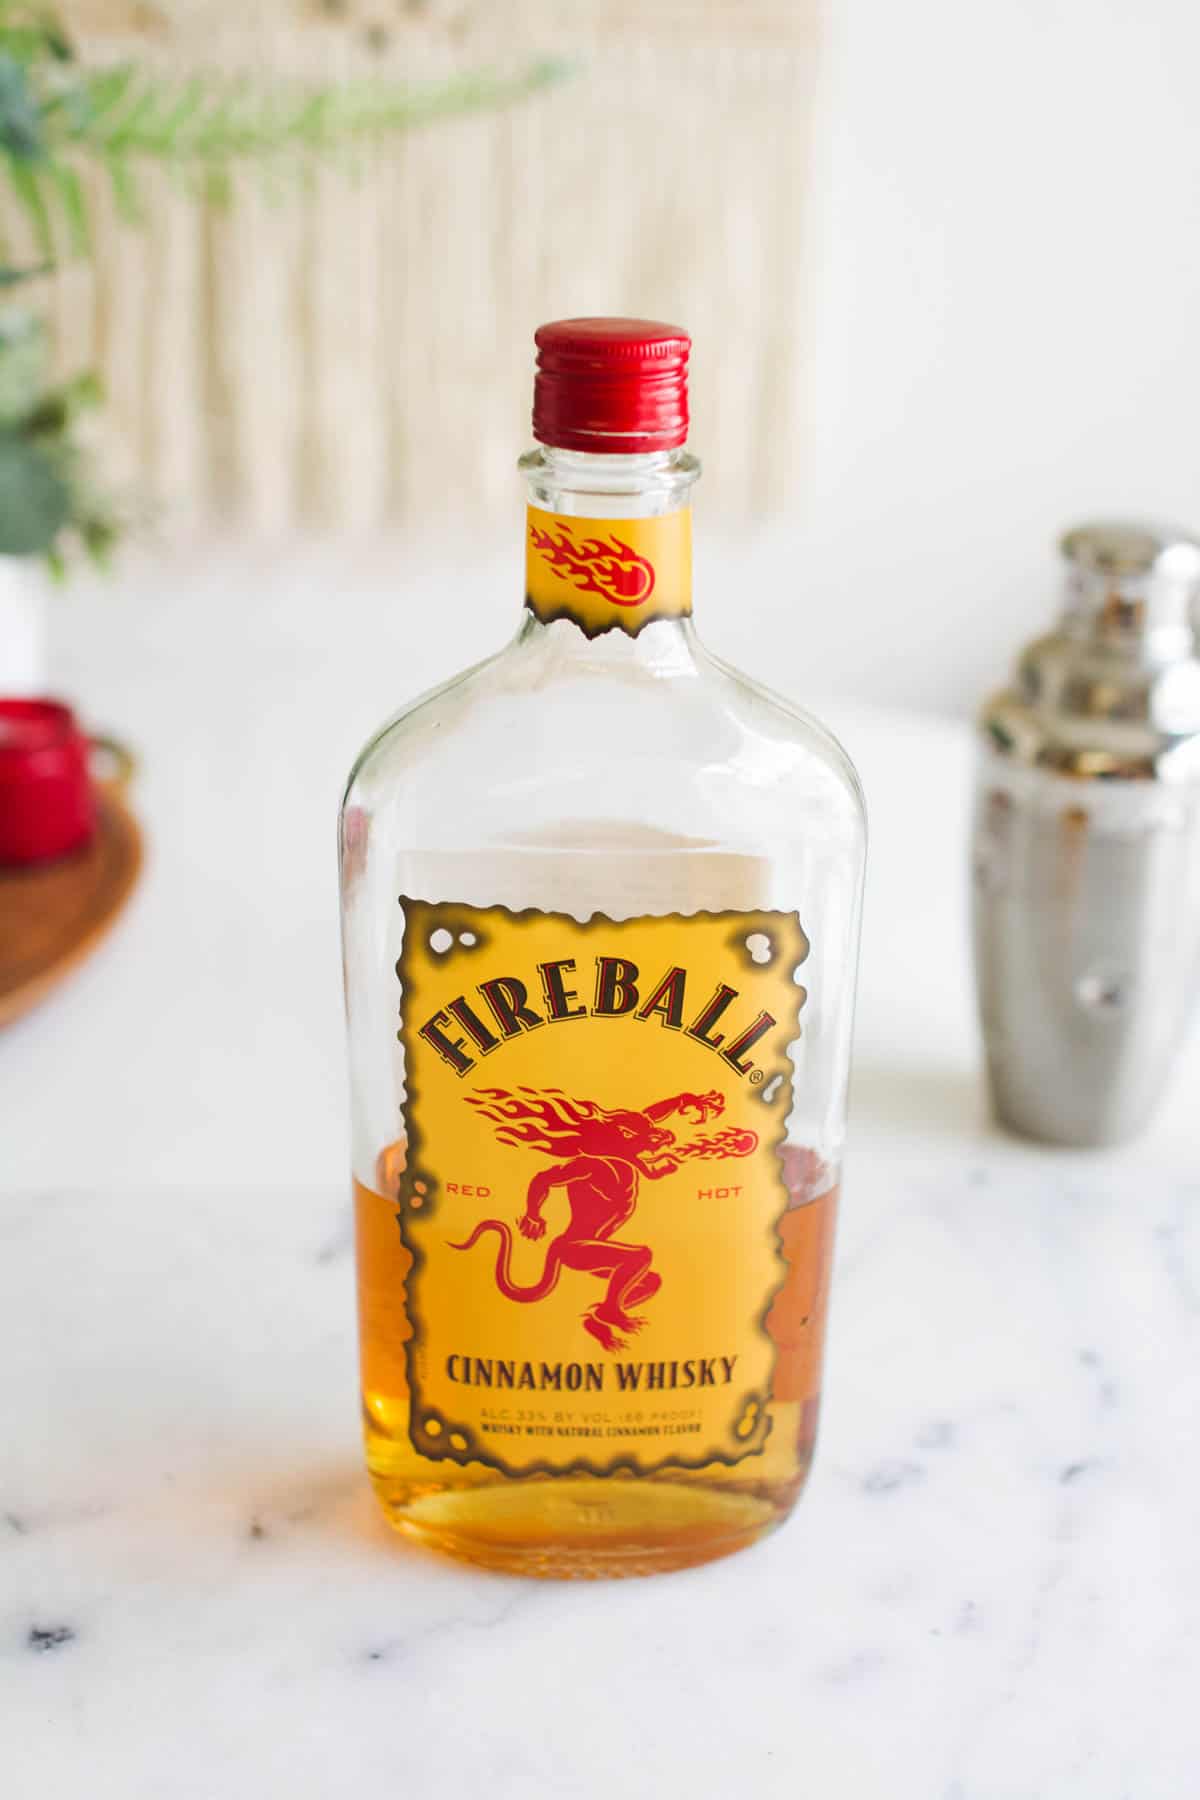 Bottle of Fireball on a table.